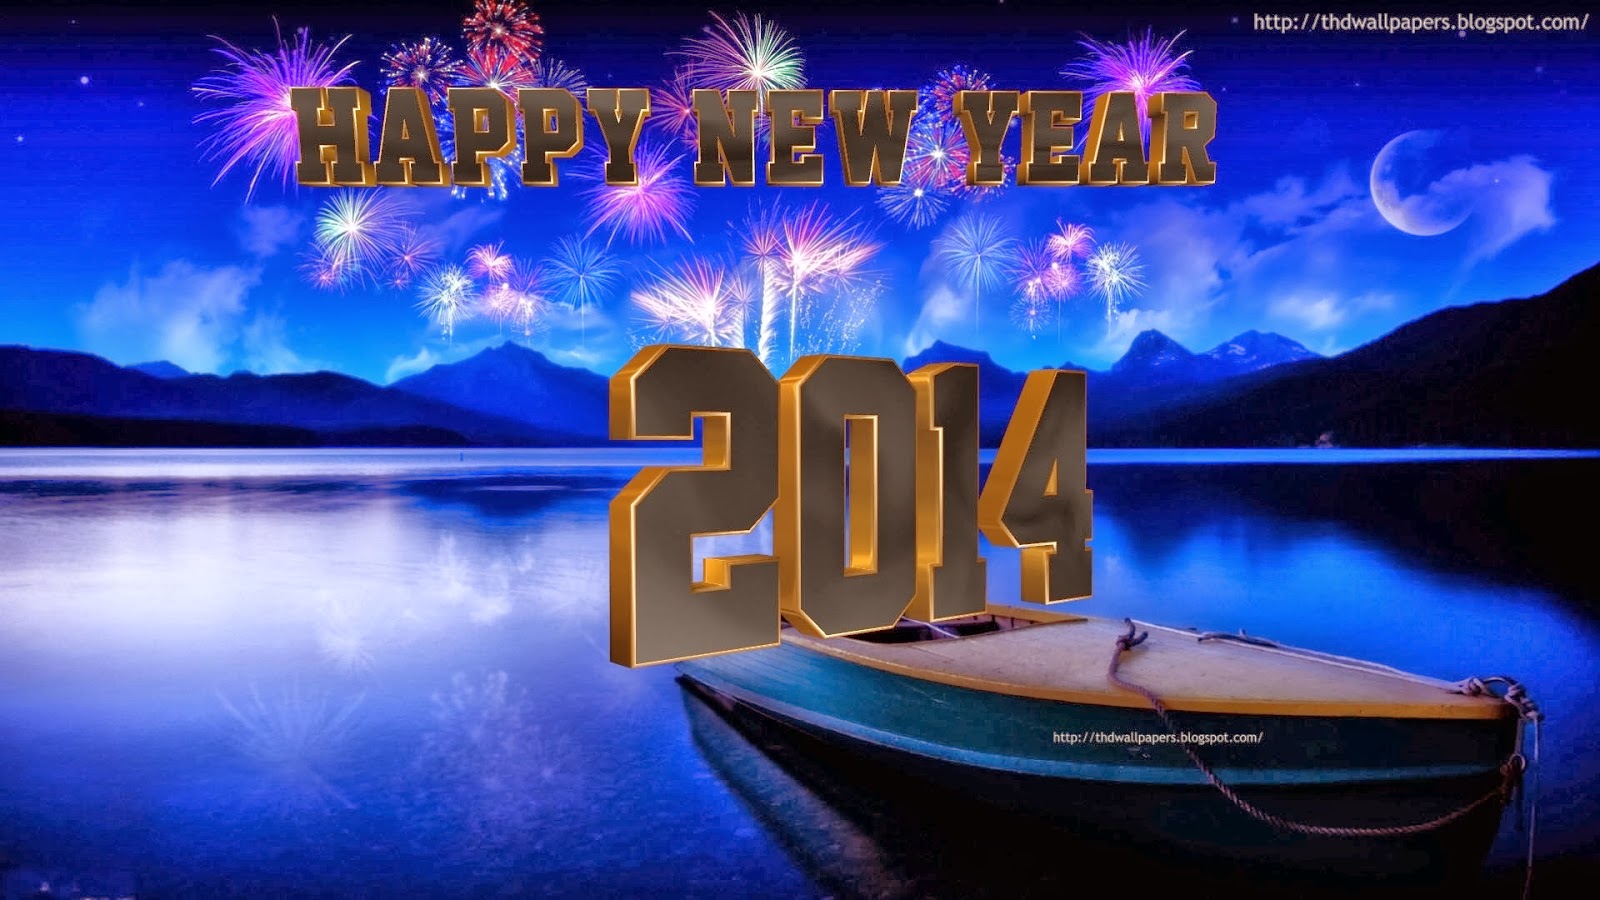 Happy New Year Wallpaper Image Photos Pictures